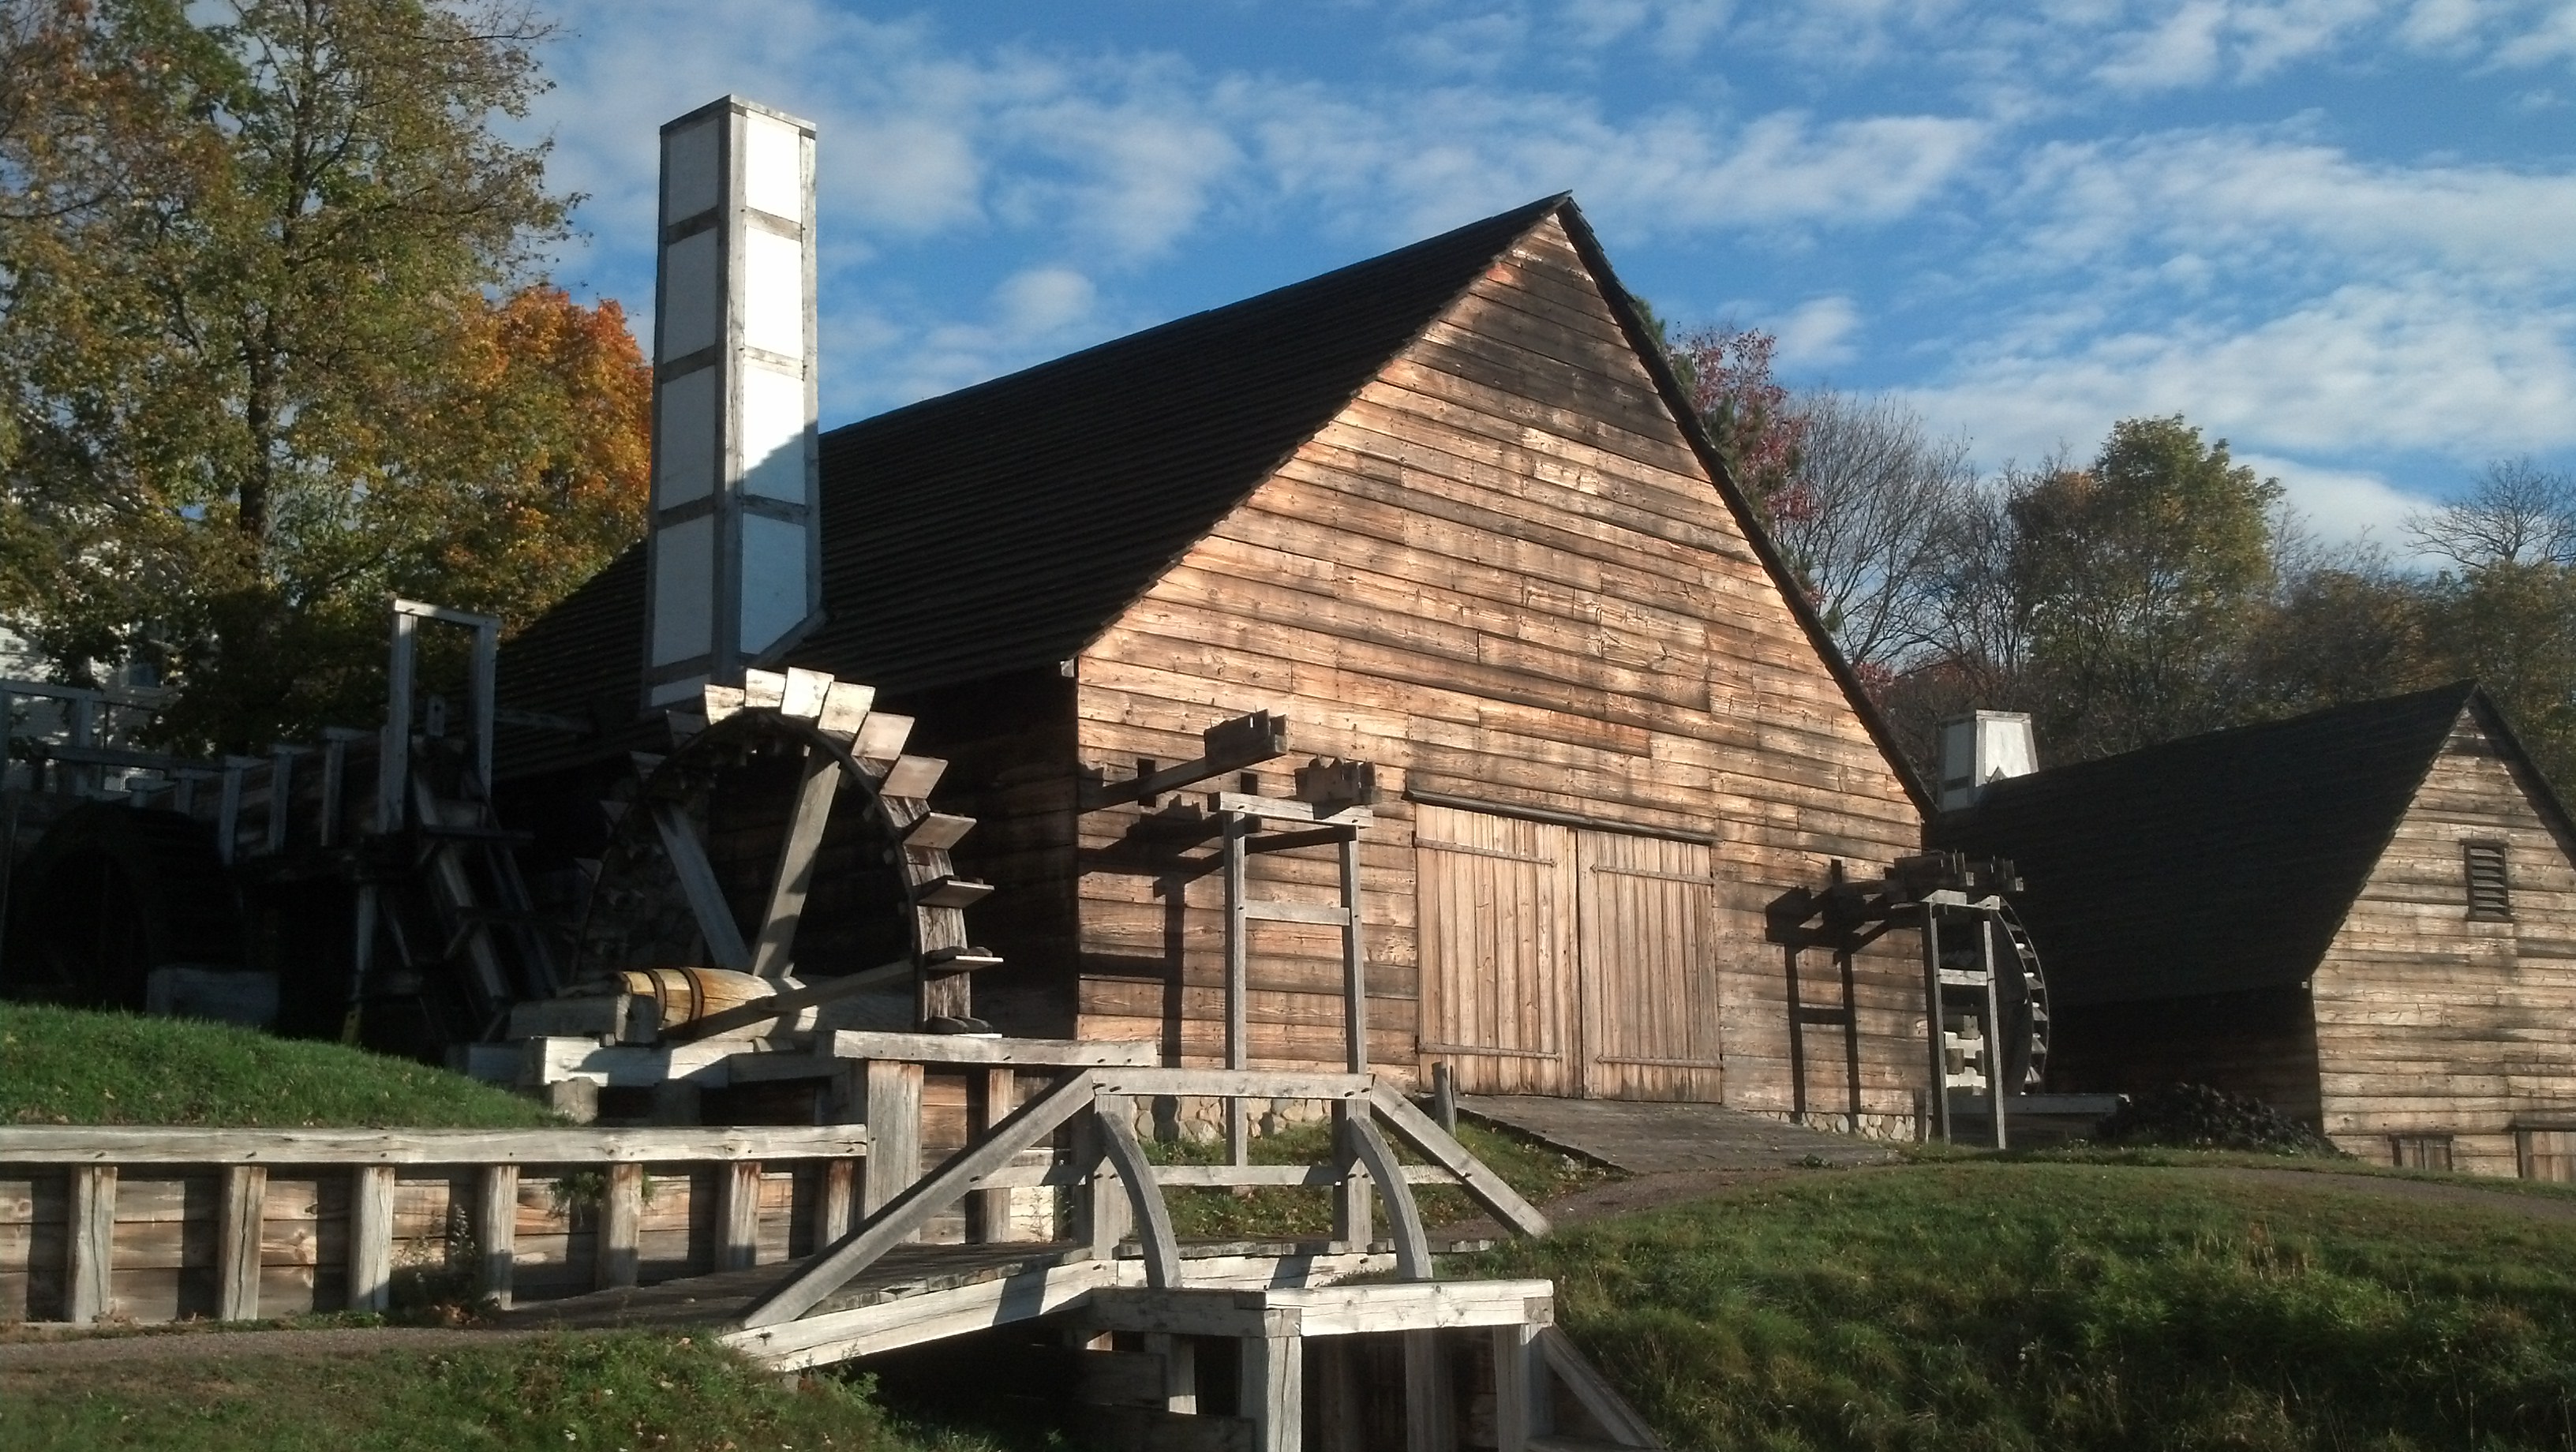 A large wooden building with water wheels on the side.